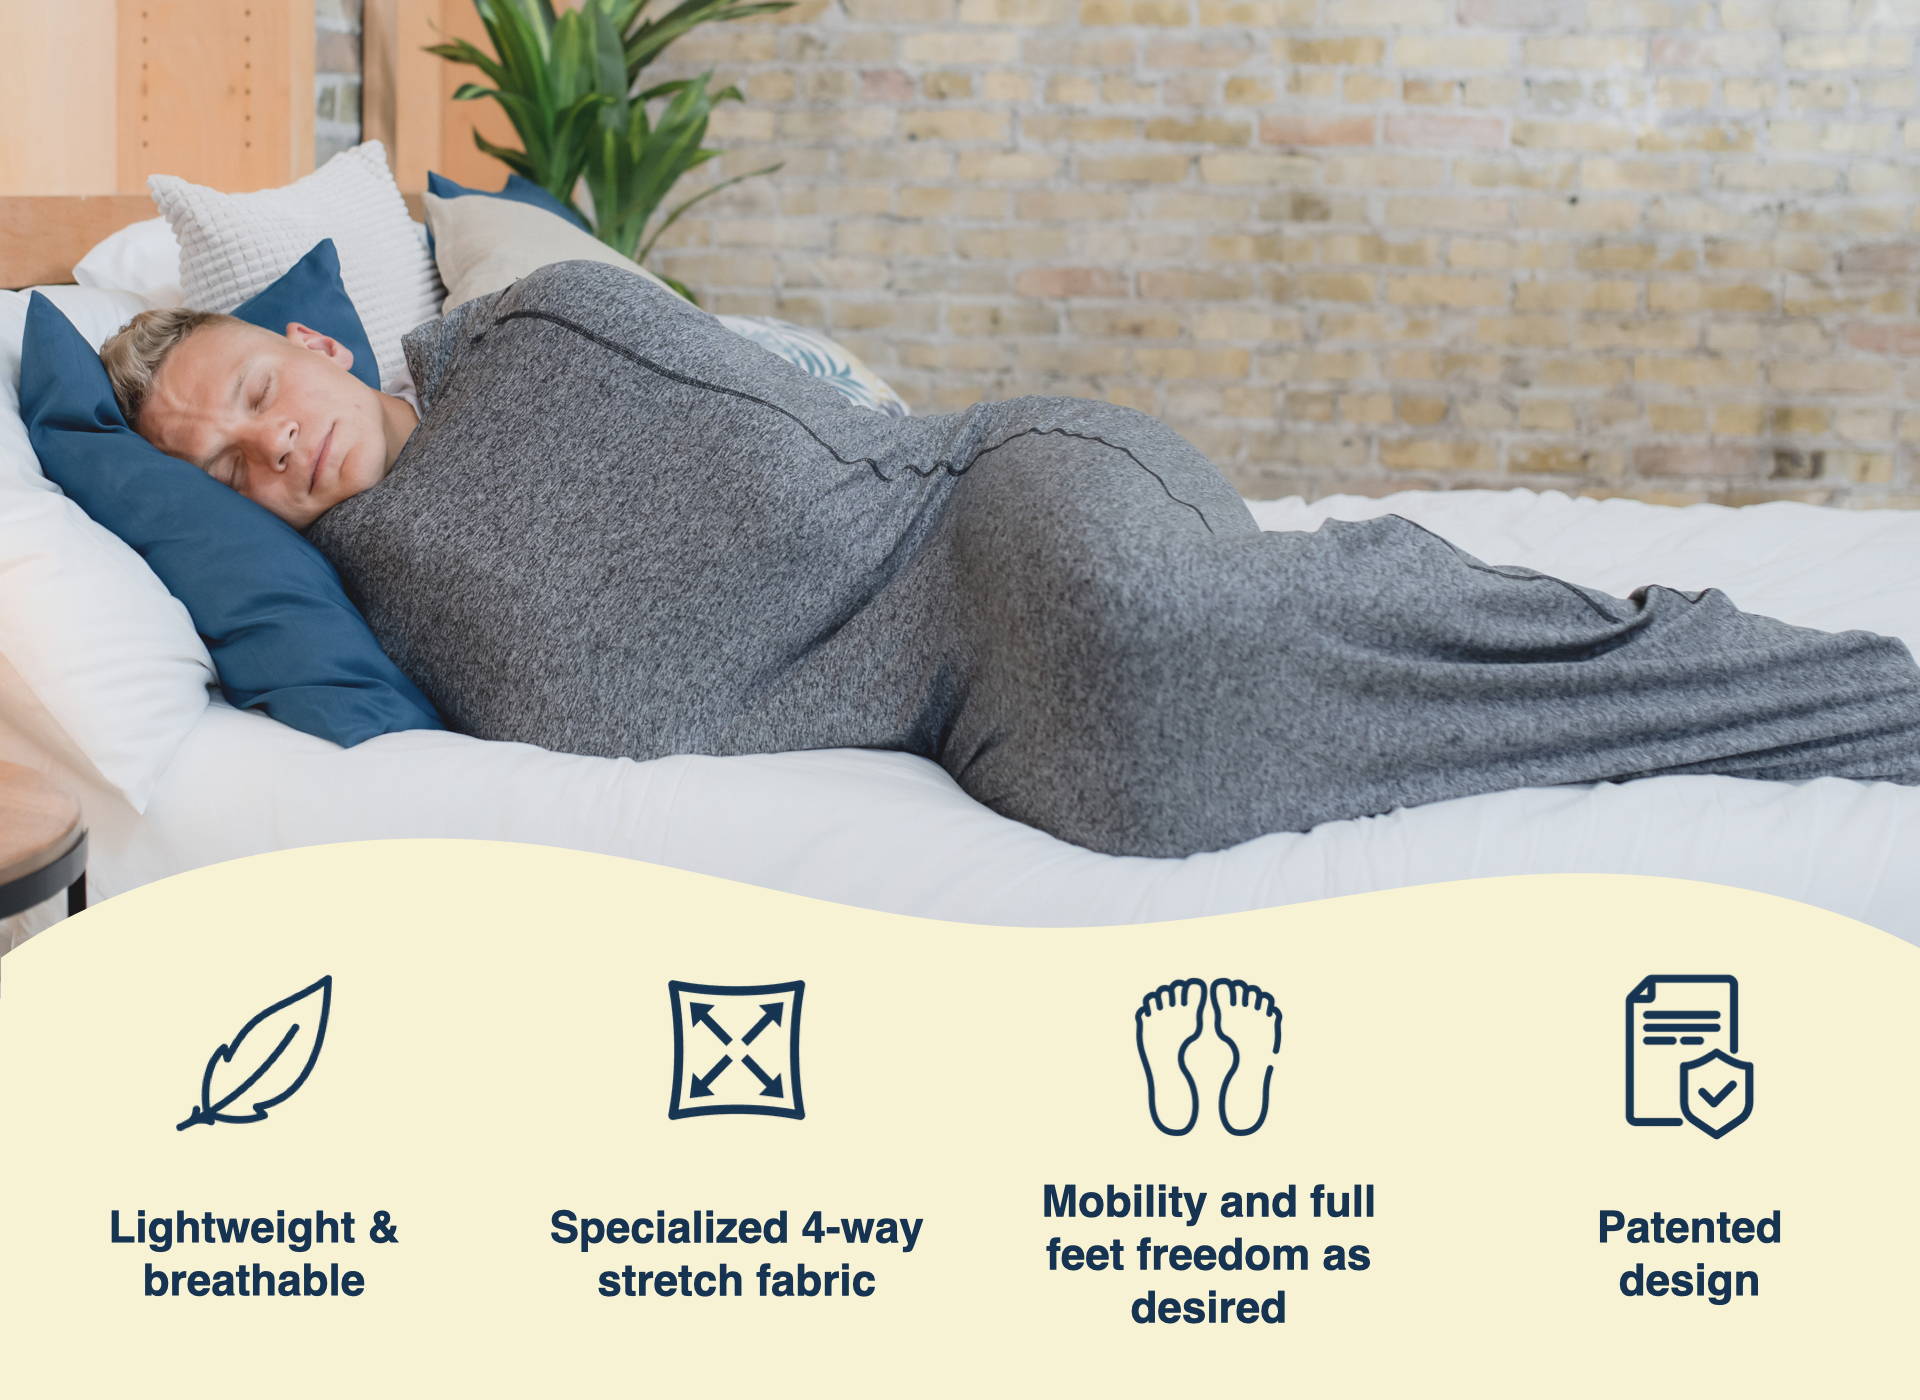 Man in sleep pod on bed. Light weight and breathable, mobility and full feet freedom as desired, specialized 4-way stretch fabric, patented design